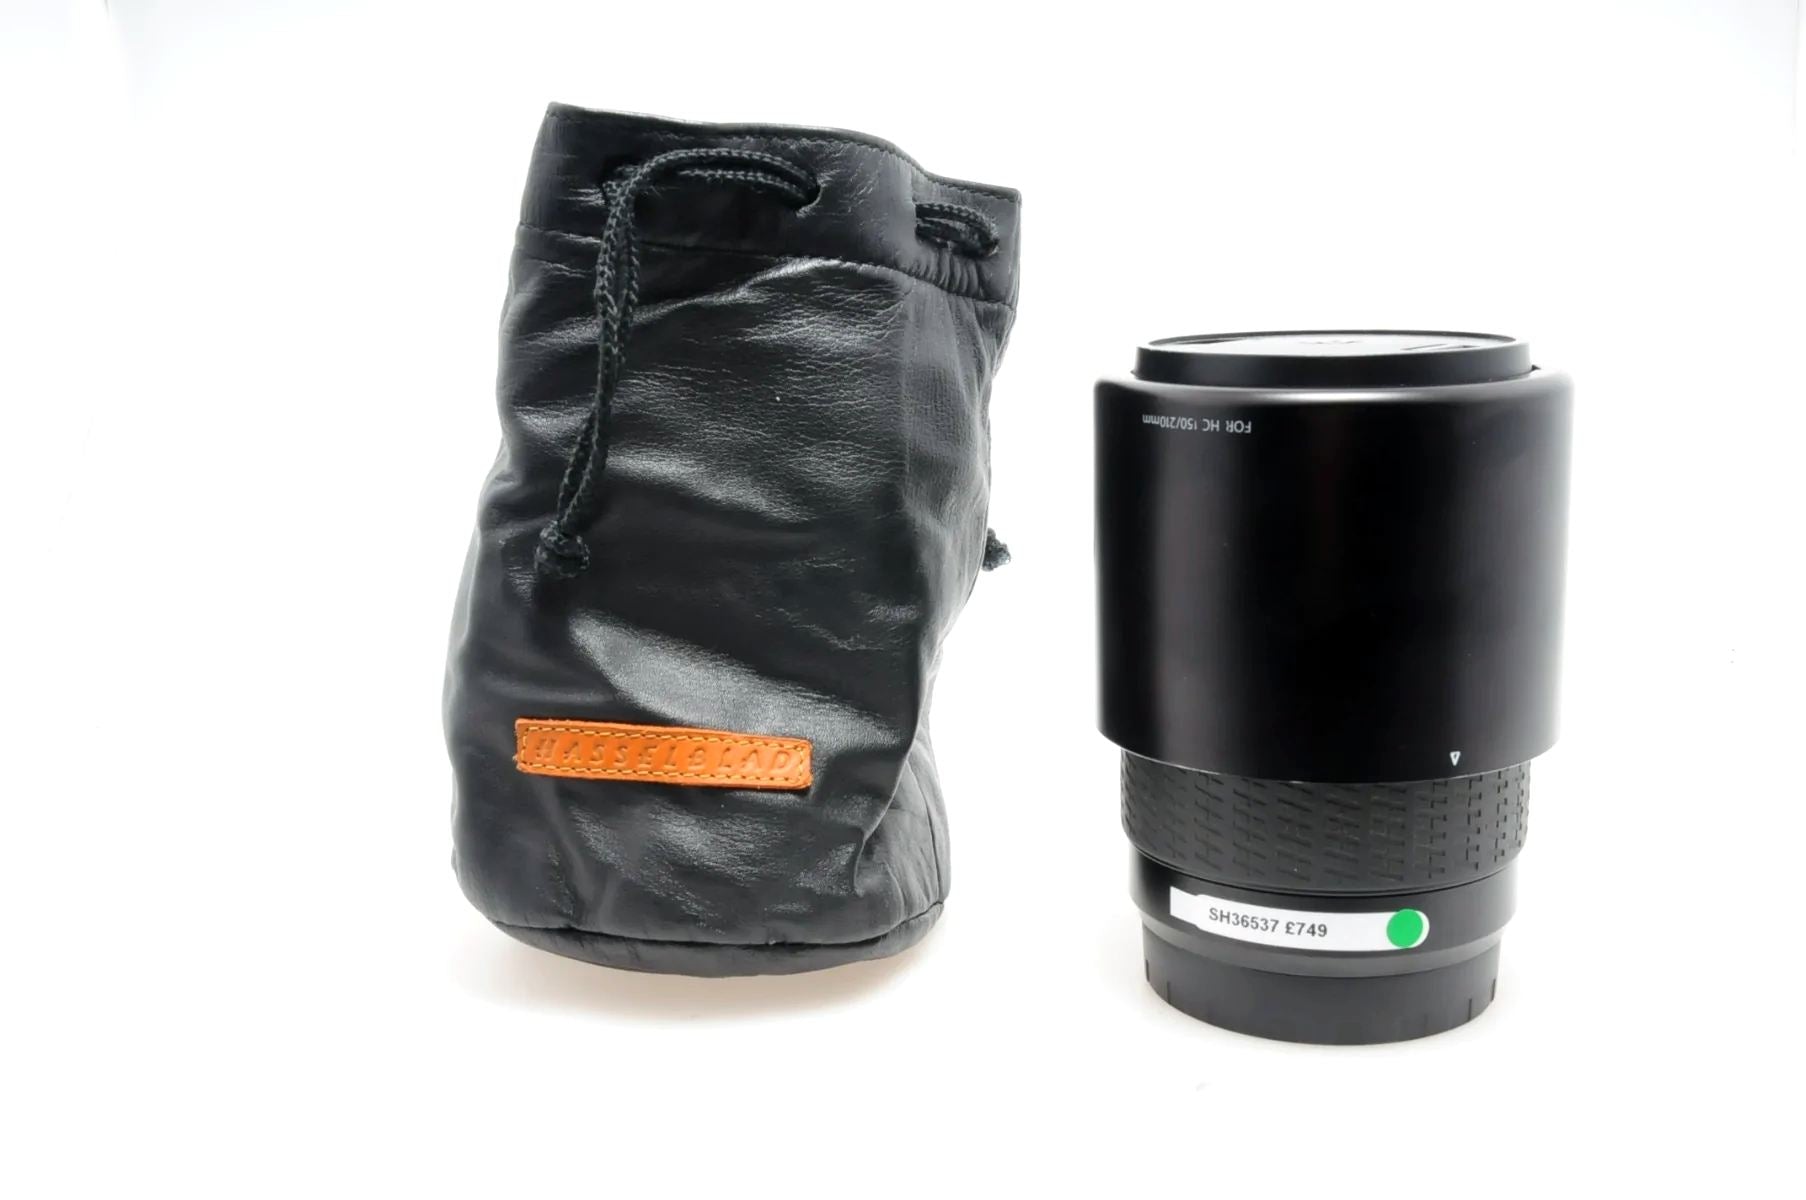 Product Image of Used Hasselblad HC 150mm F3.2 Digital lens (Actuations 27245)(Boxed SH36537)